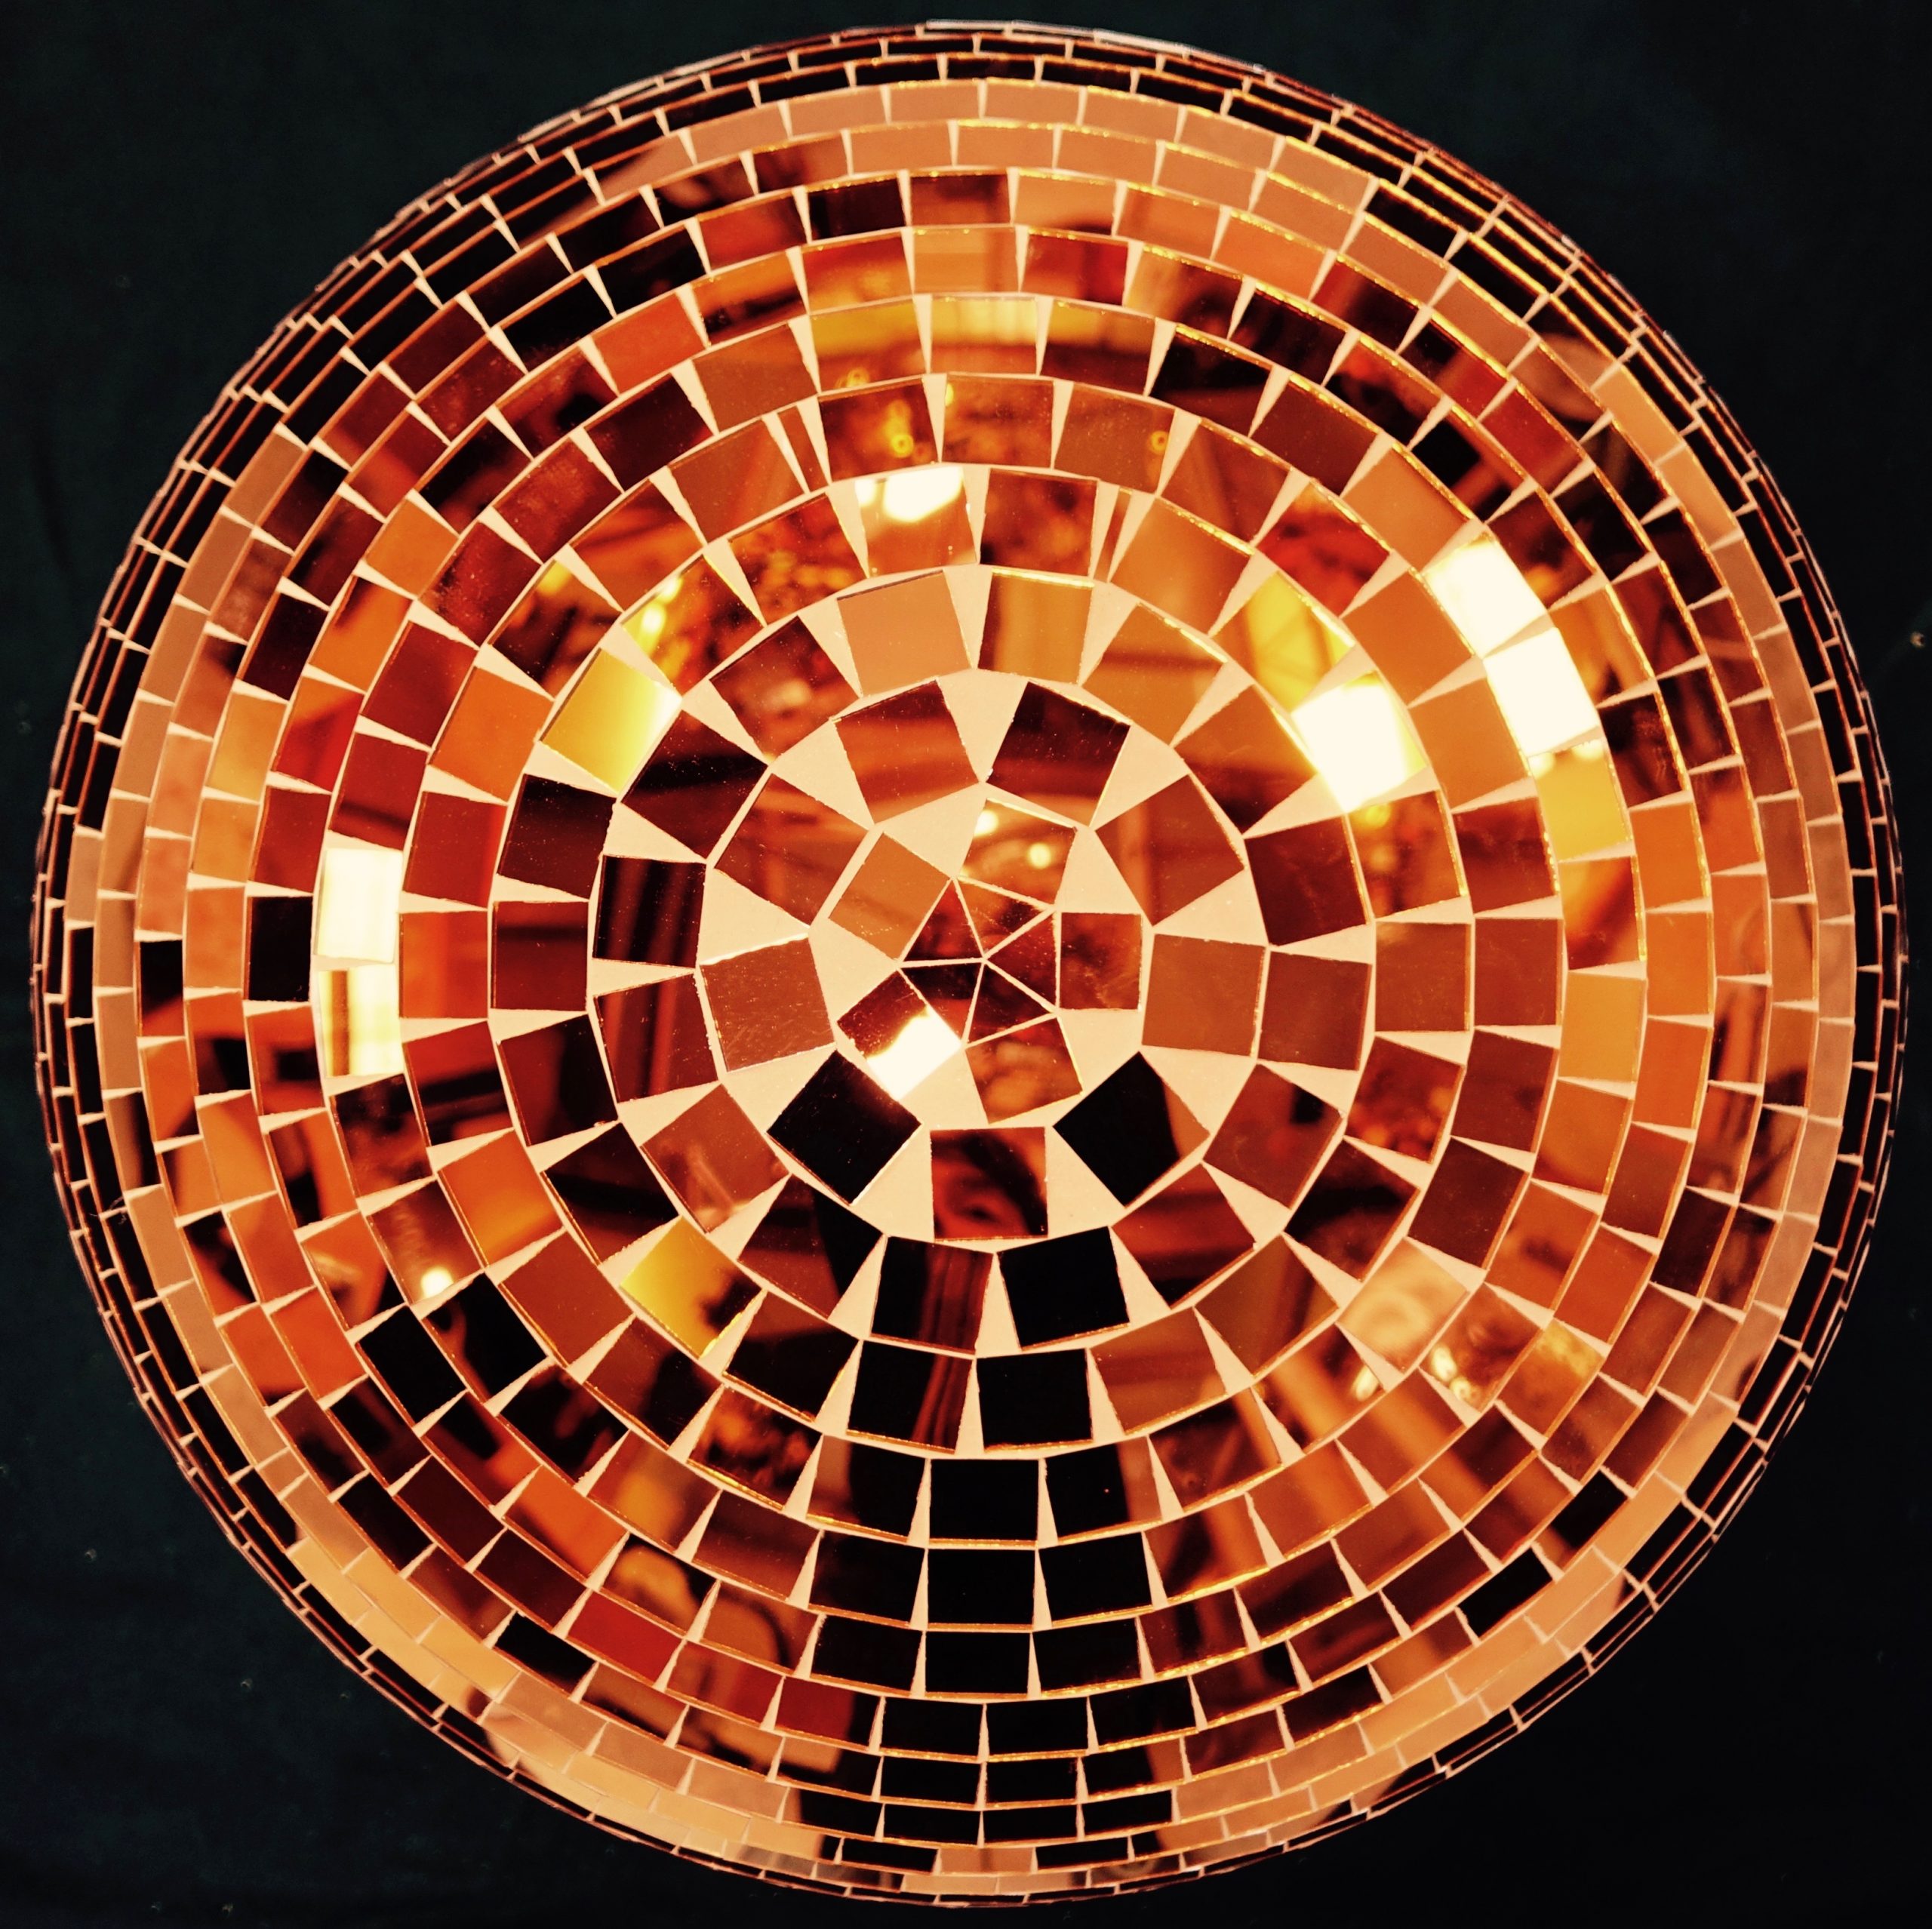 750mm blood orange mirror ball approx weight 25kg dry hire fee - £130 purchase fee - POA